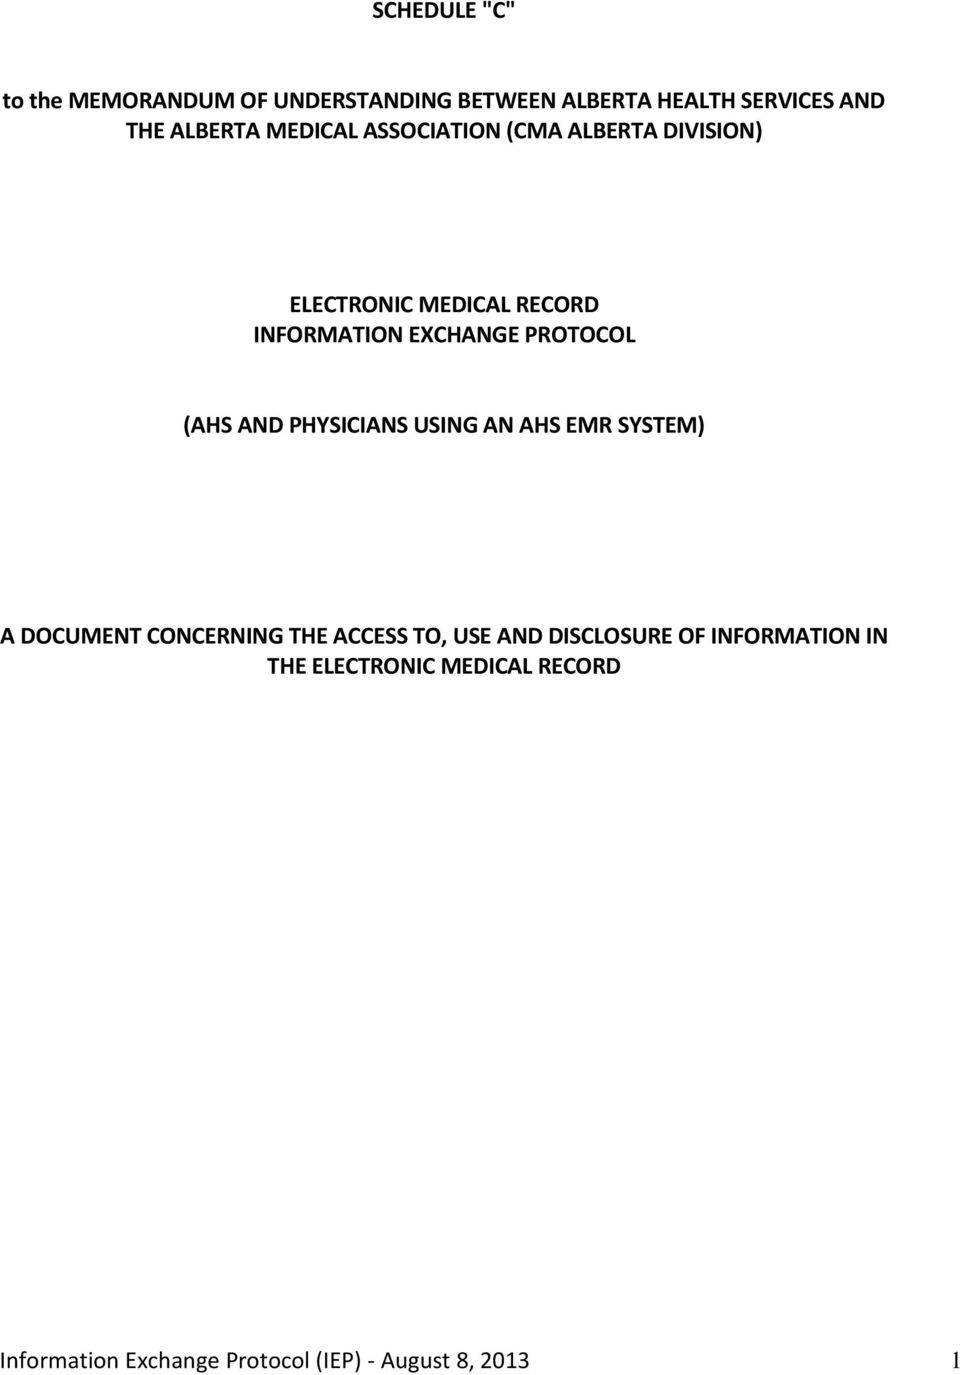 (AHS AND PHYSICIANS USING AN AHS EMR SYSTEM) A DOCUMENT CONCERNING THE ACCESS TO, USE AND